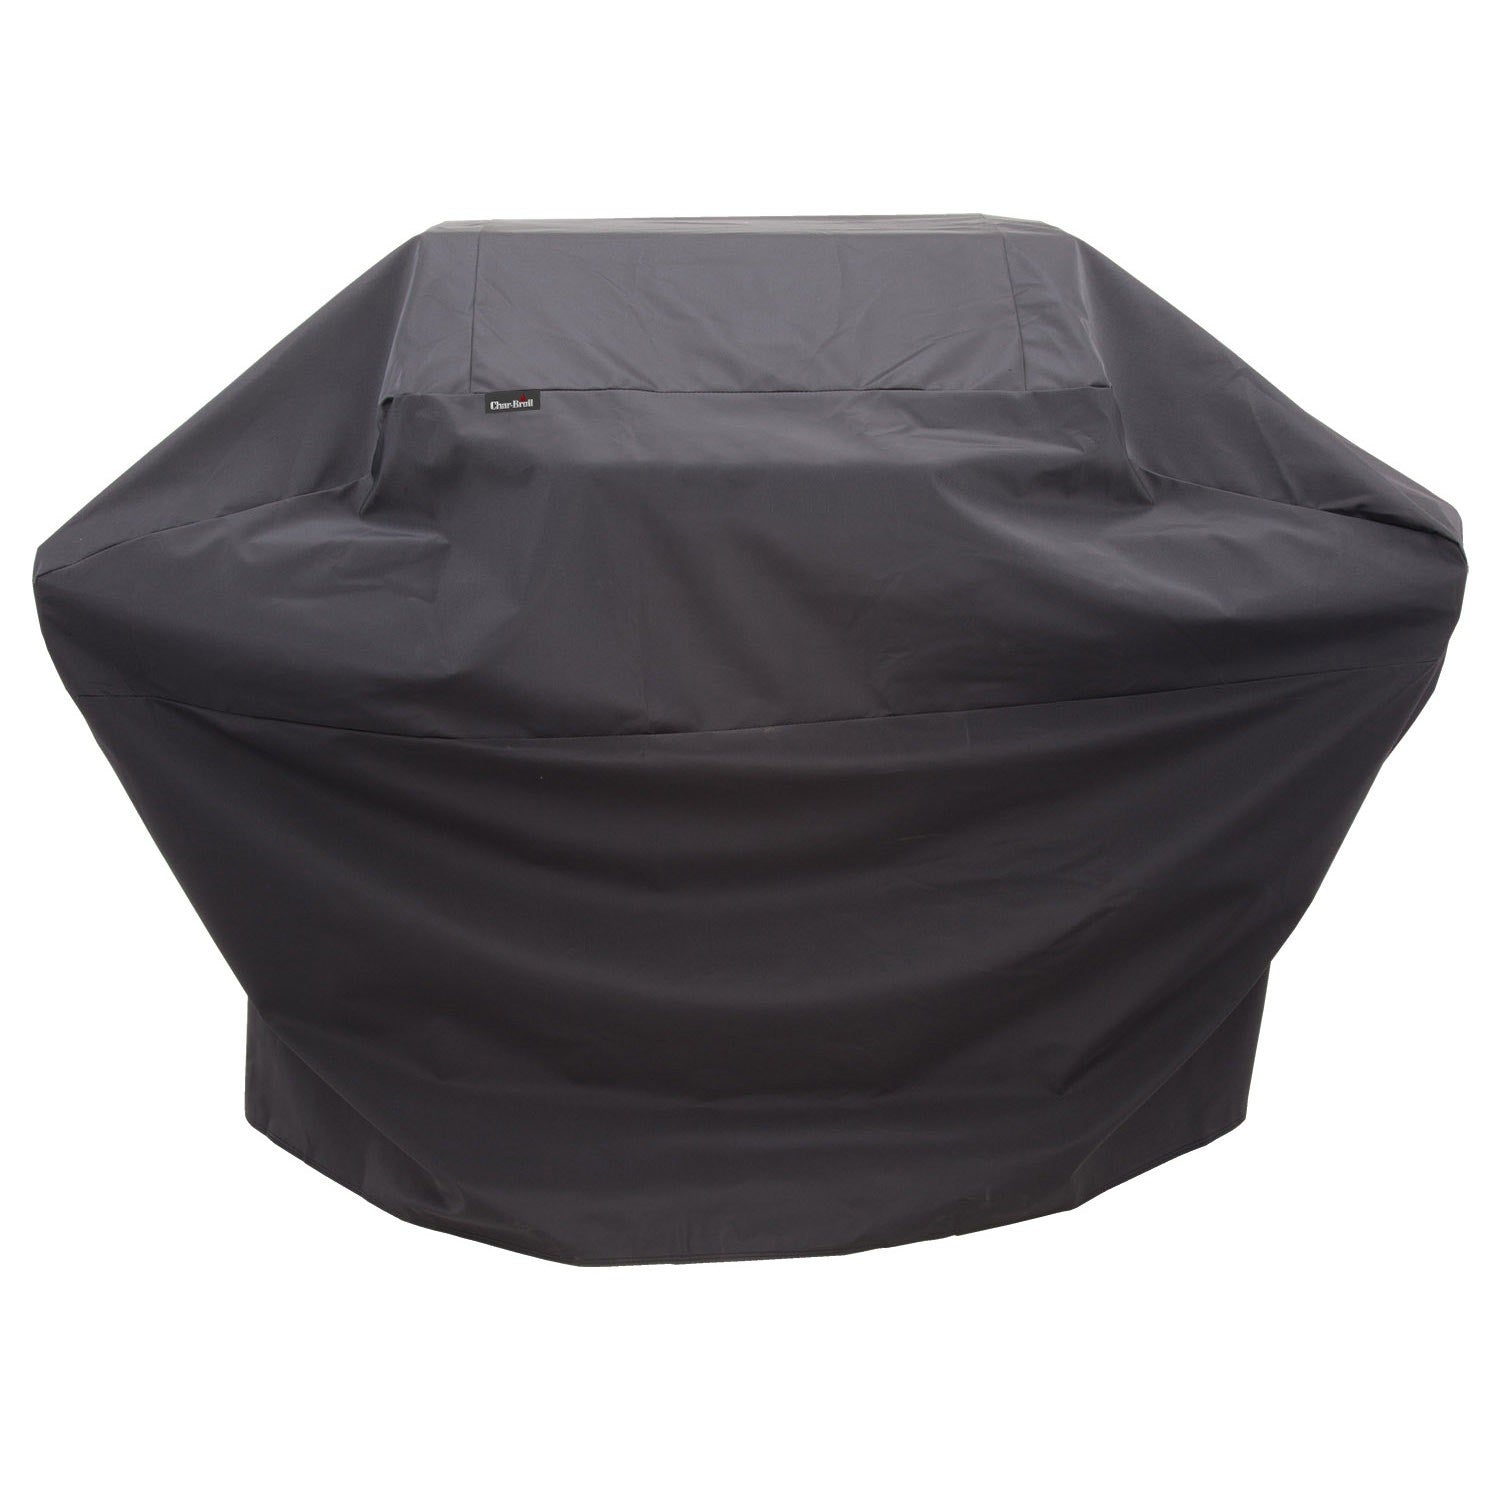 Char-Broil Large 3-4 Burner Performance Grill Cover